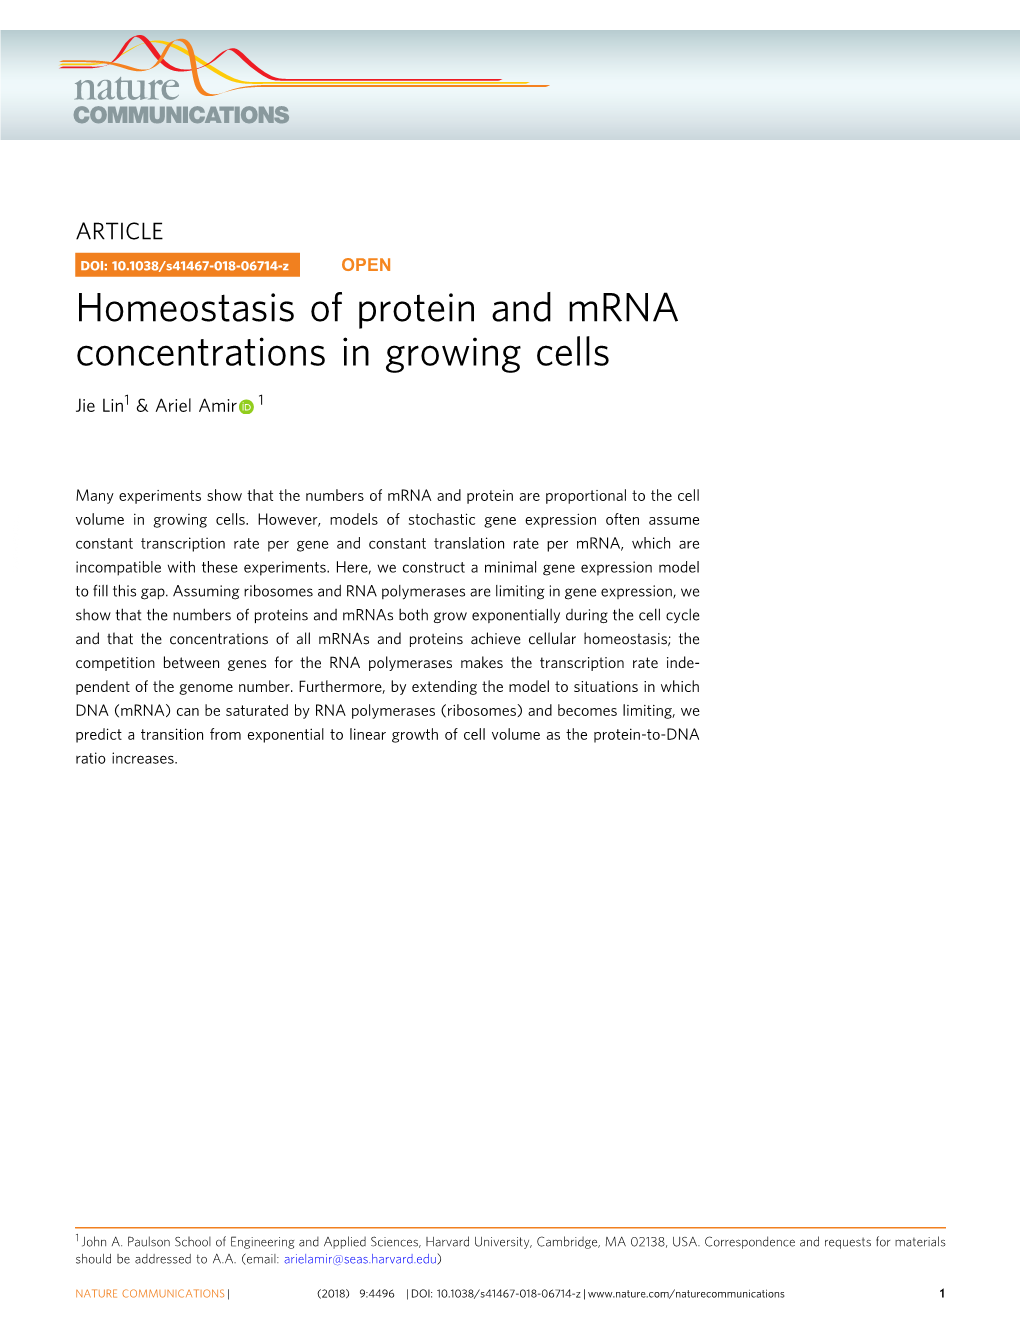 Homeostasis of Protein and Mrna Concentrations in Growing Cells